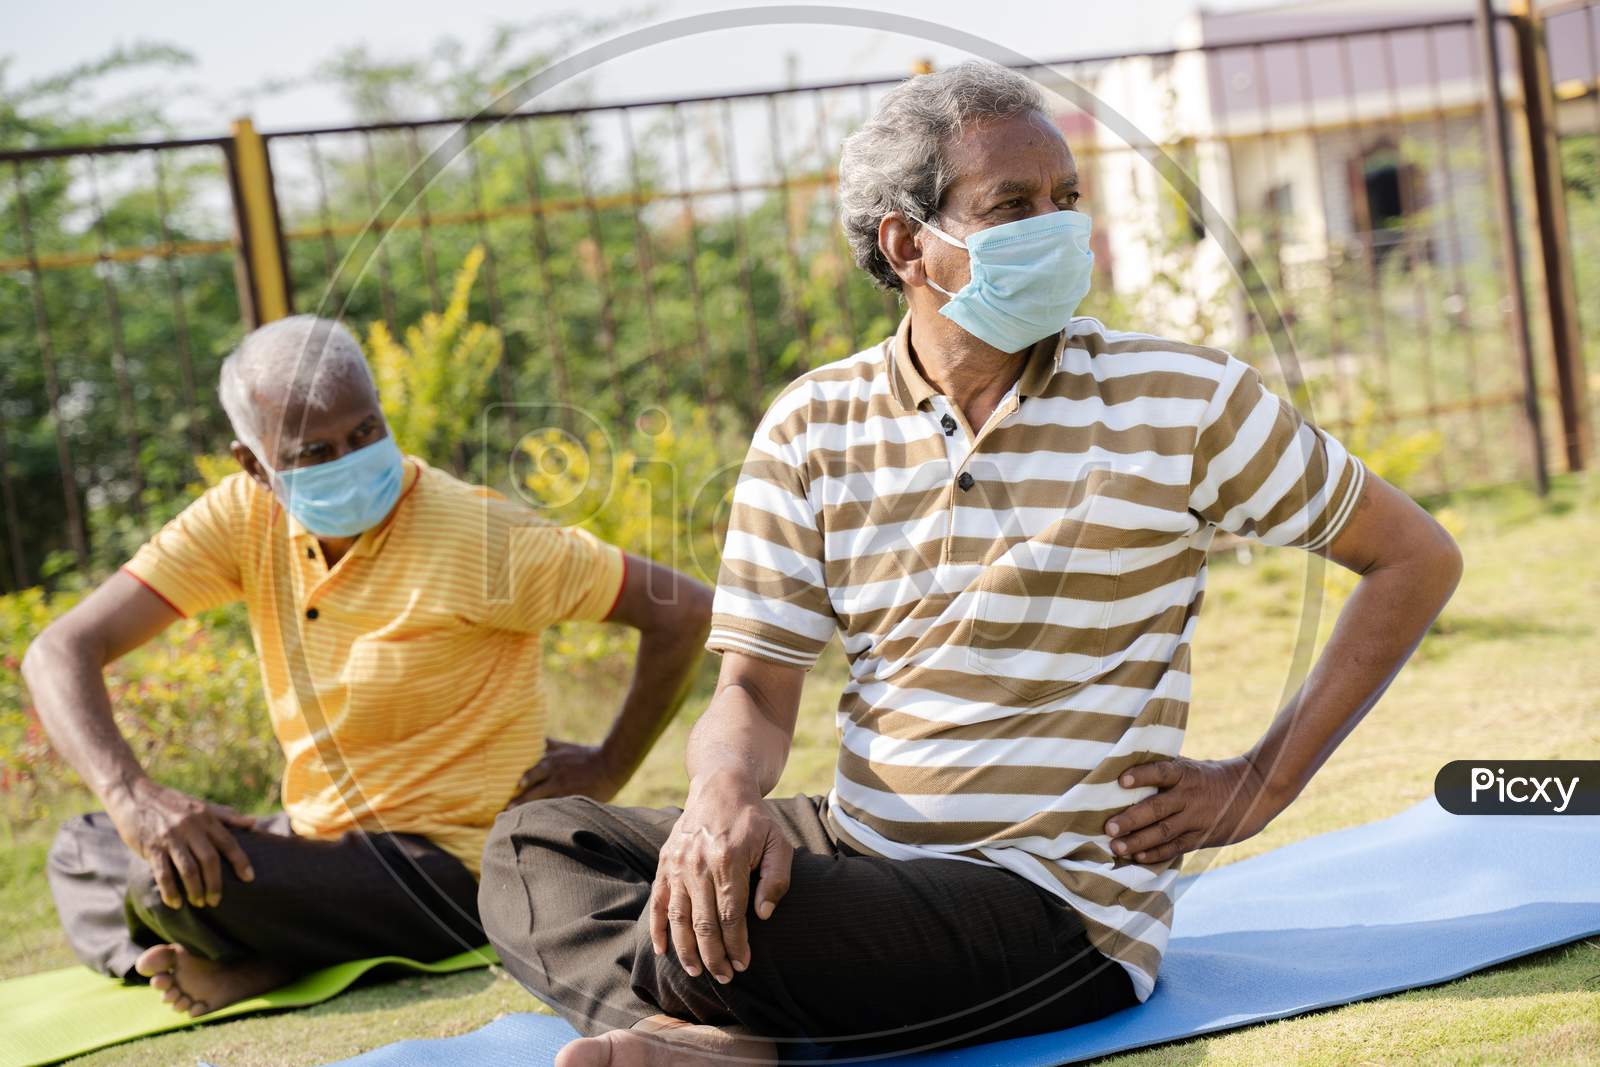 Two Active Senior People With Medical Face Mask Exercising On Yoga Mat During Early Morning - Concept Of New Normal, Elderly Helthcare And Fitness Class At Park During Coronavirus Covid-19 Pandemic